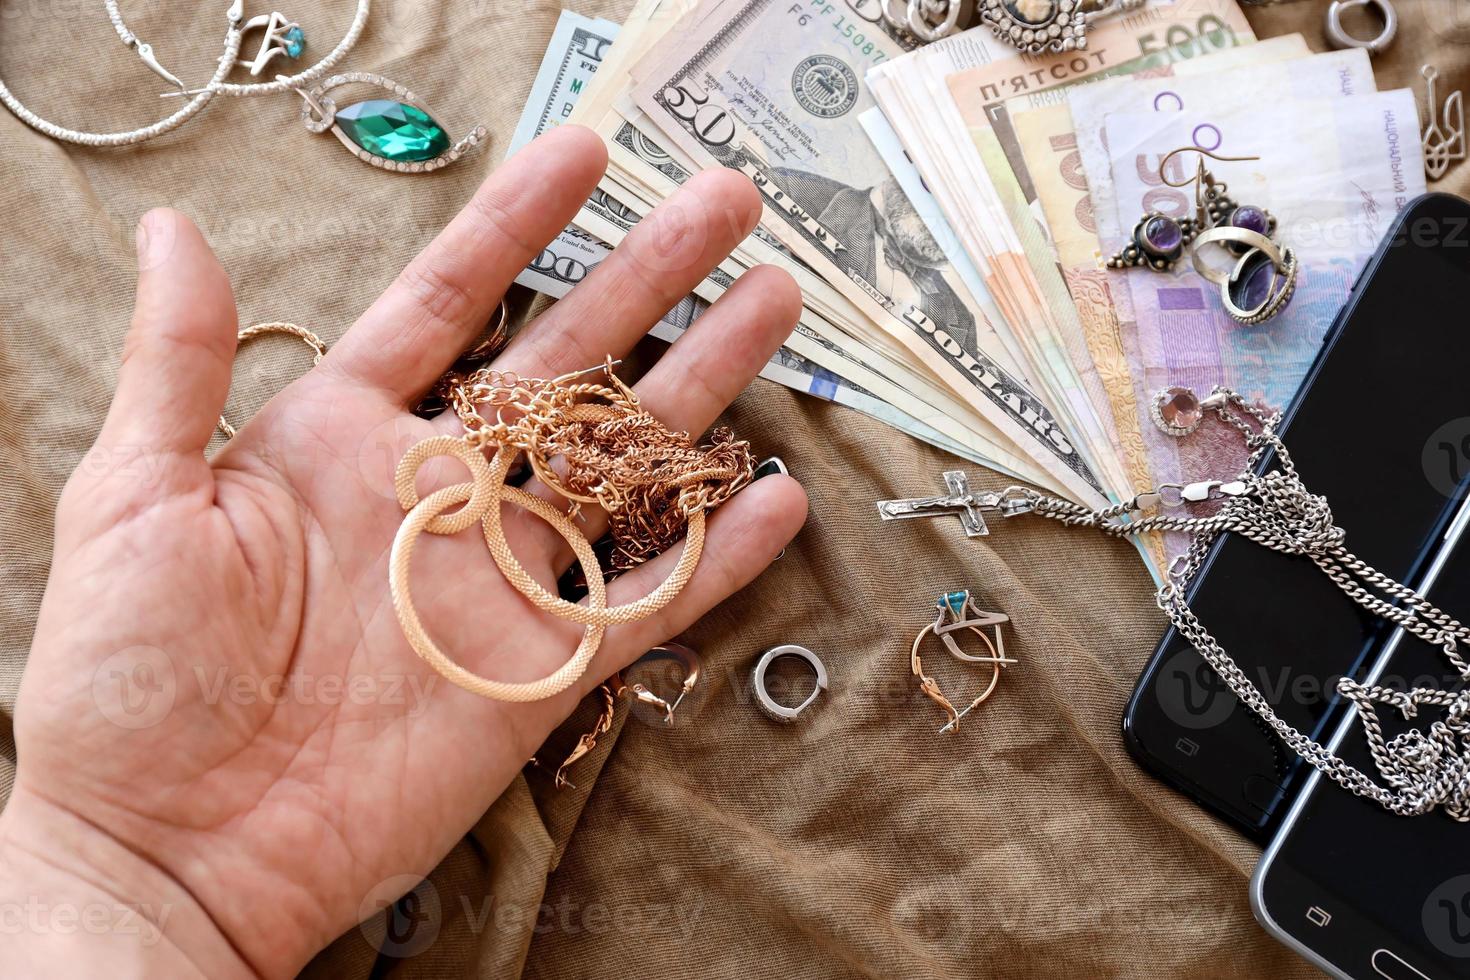 Marauders hand with bunch of stolen jewelry, money and smartphones on military uniform cloth fabric. Looting by Russian soldiers in the Ukrainian cities during Russian invasion on Ukraine photo